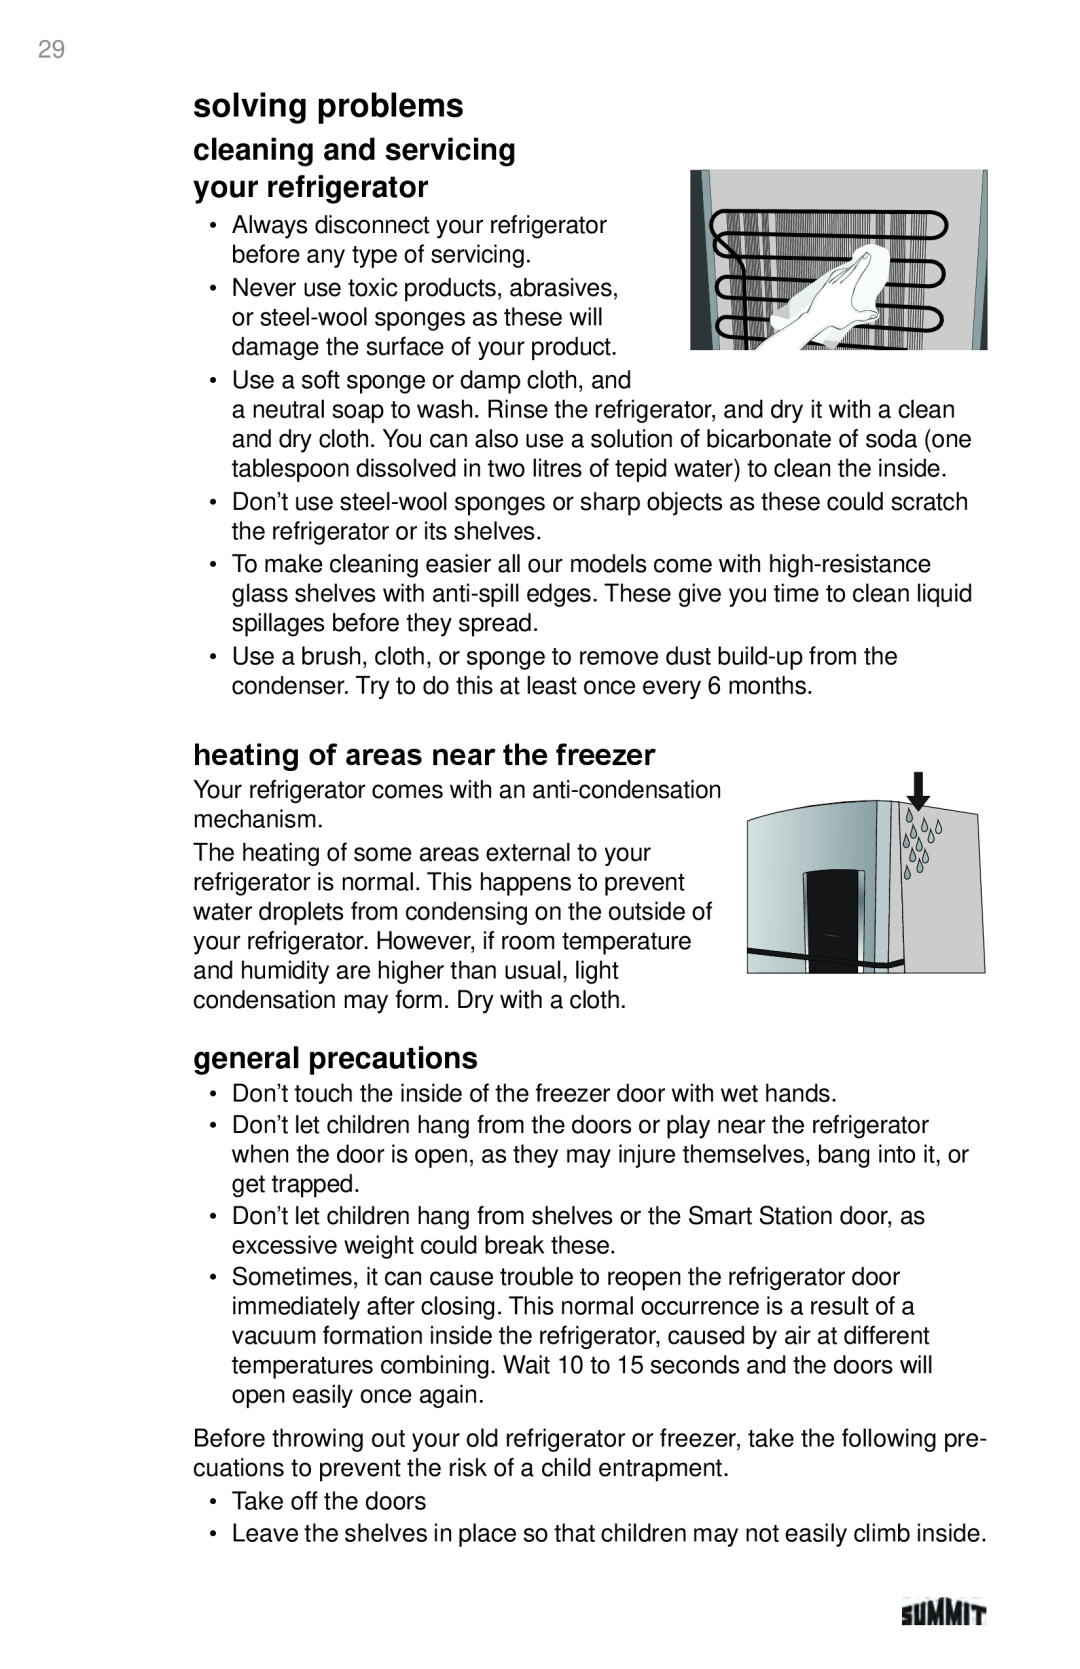 Summit 225D6783P011 manual solving problems, cleaning and servicing your refrigerator, heating of areas near the freezer 